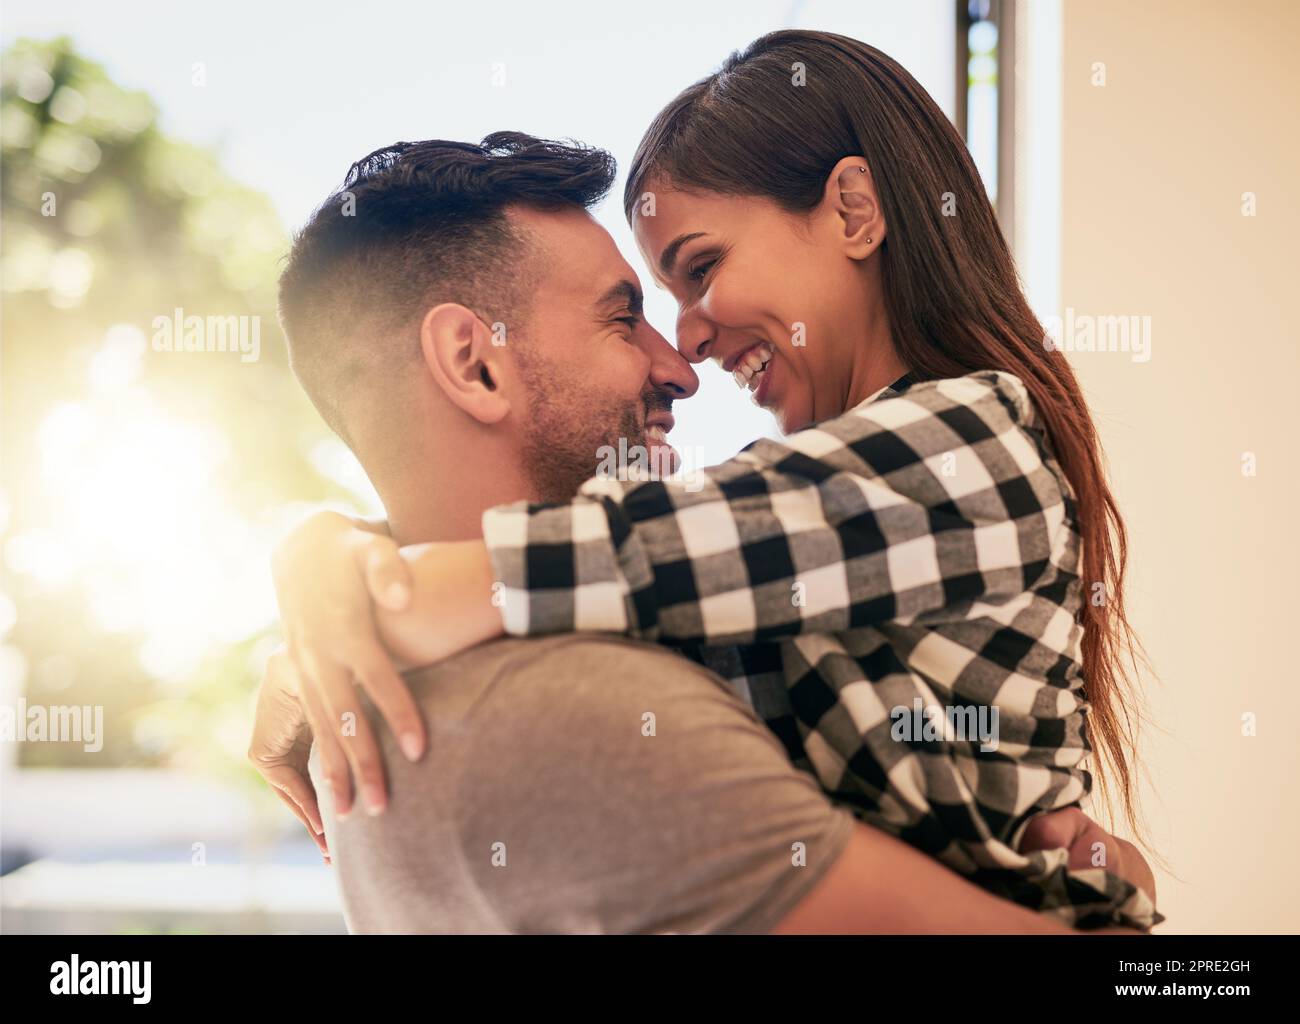 You fill my heart with so much happiness. an affectionate young couple bonding at home. Stock Photo